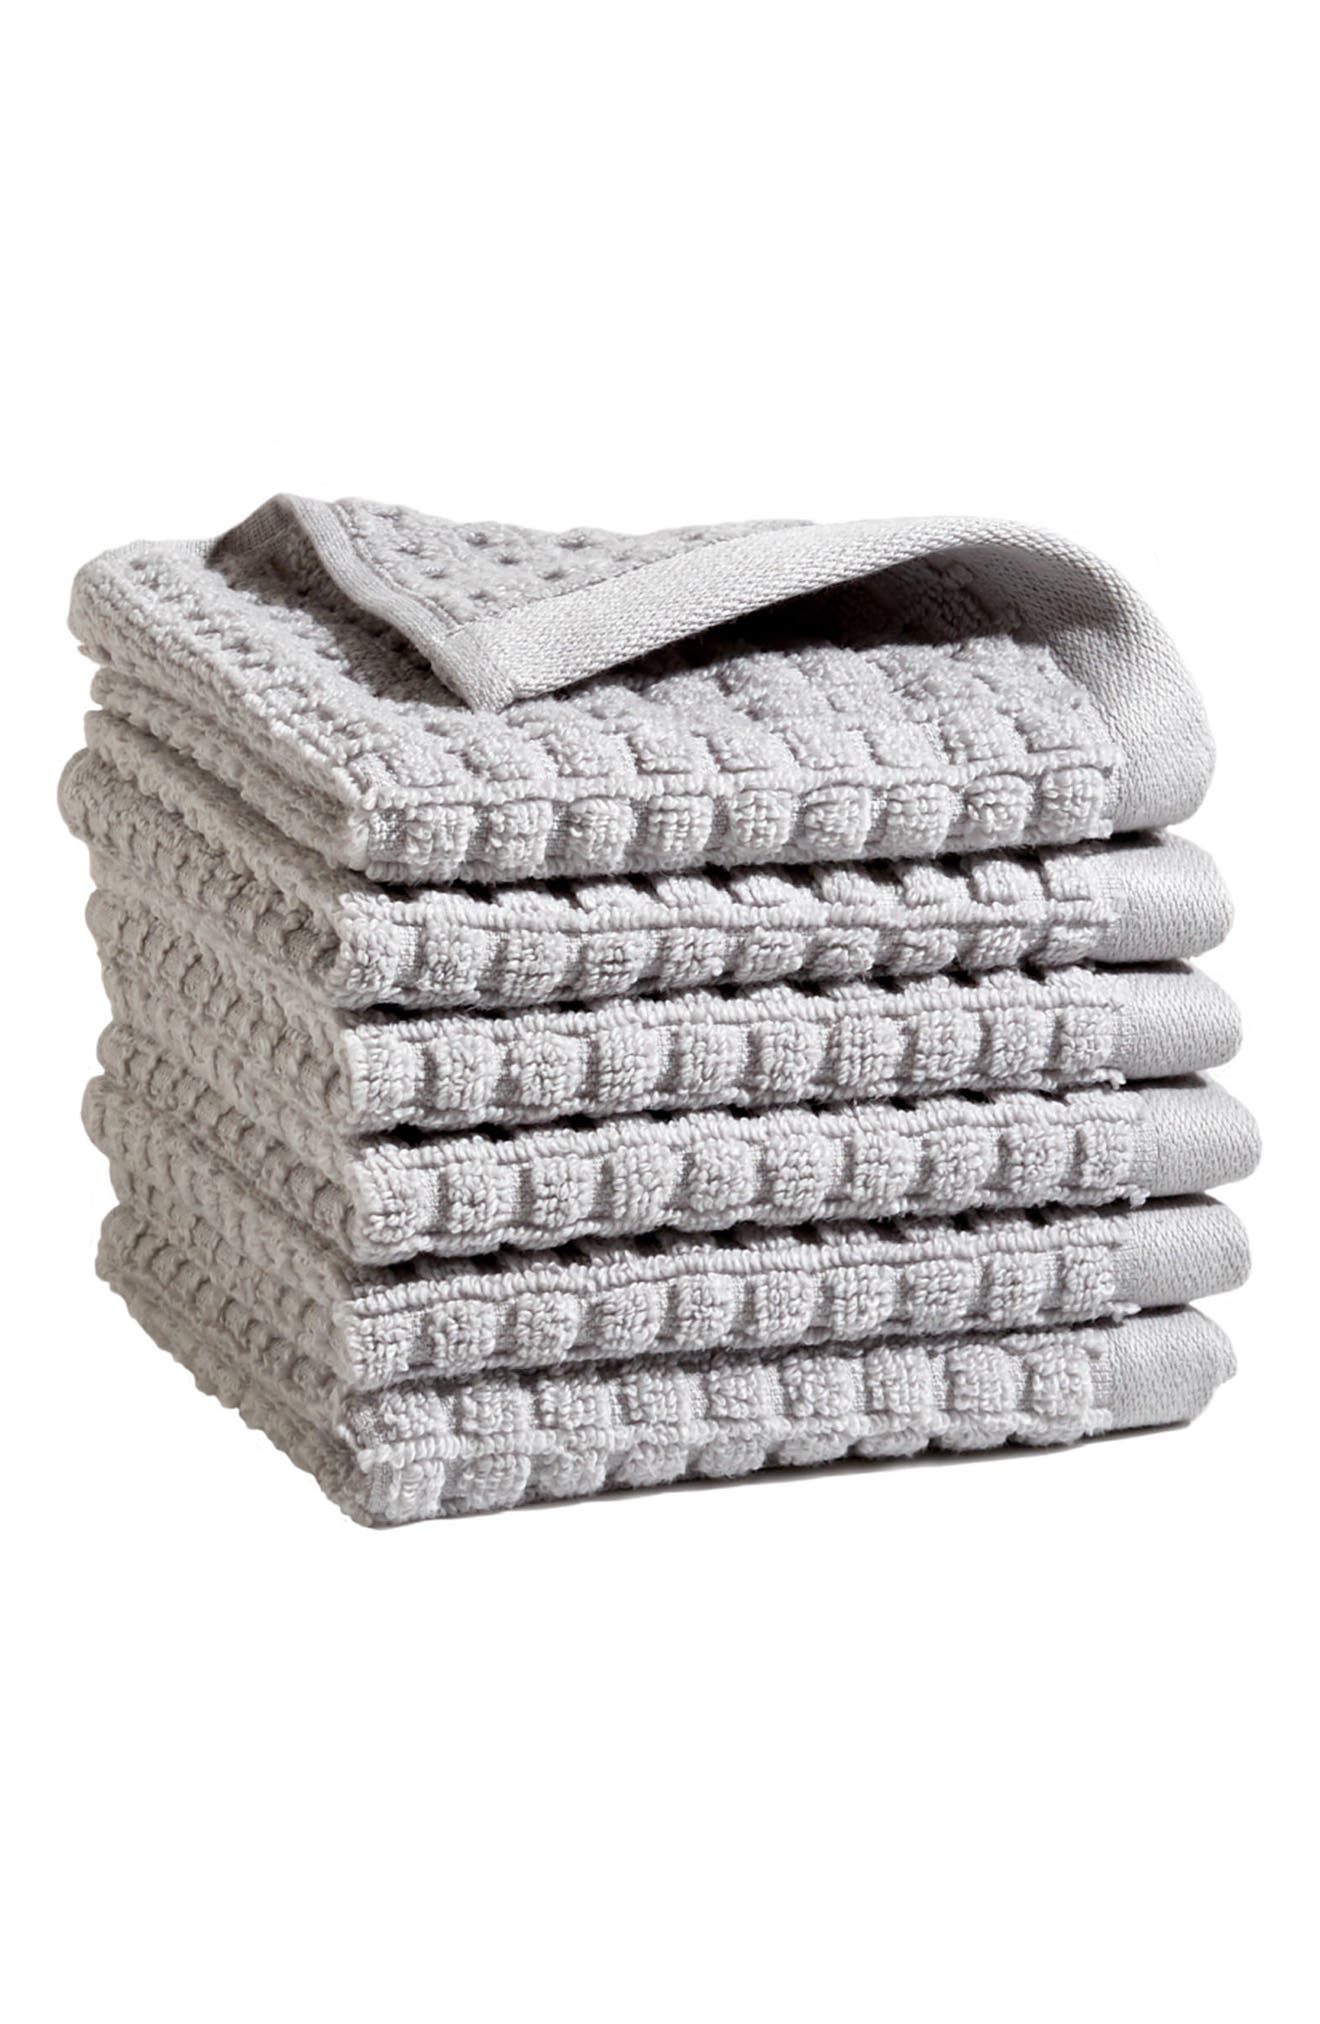 DKNY 6-Pack Cotton Washcloths in Grey at Nordstrom